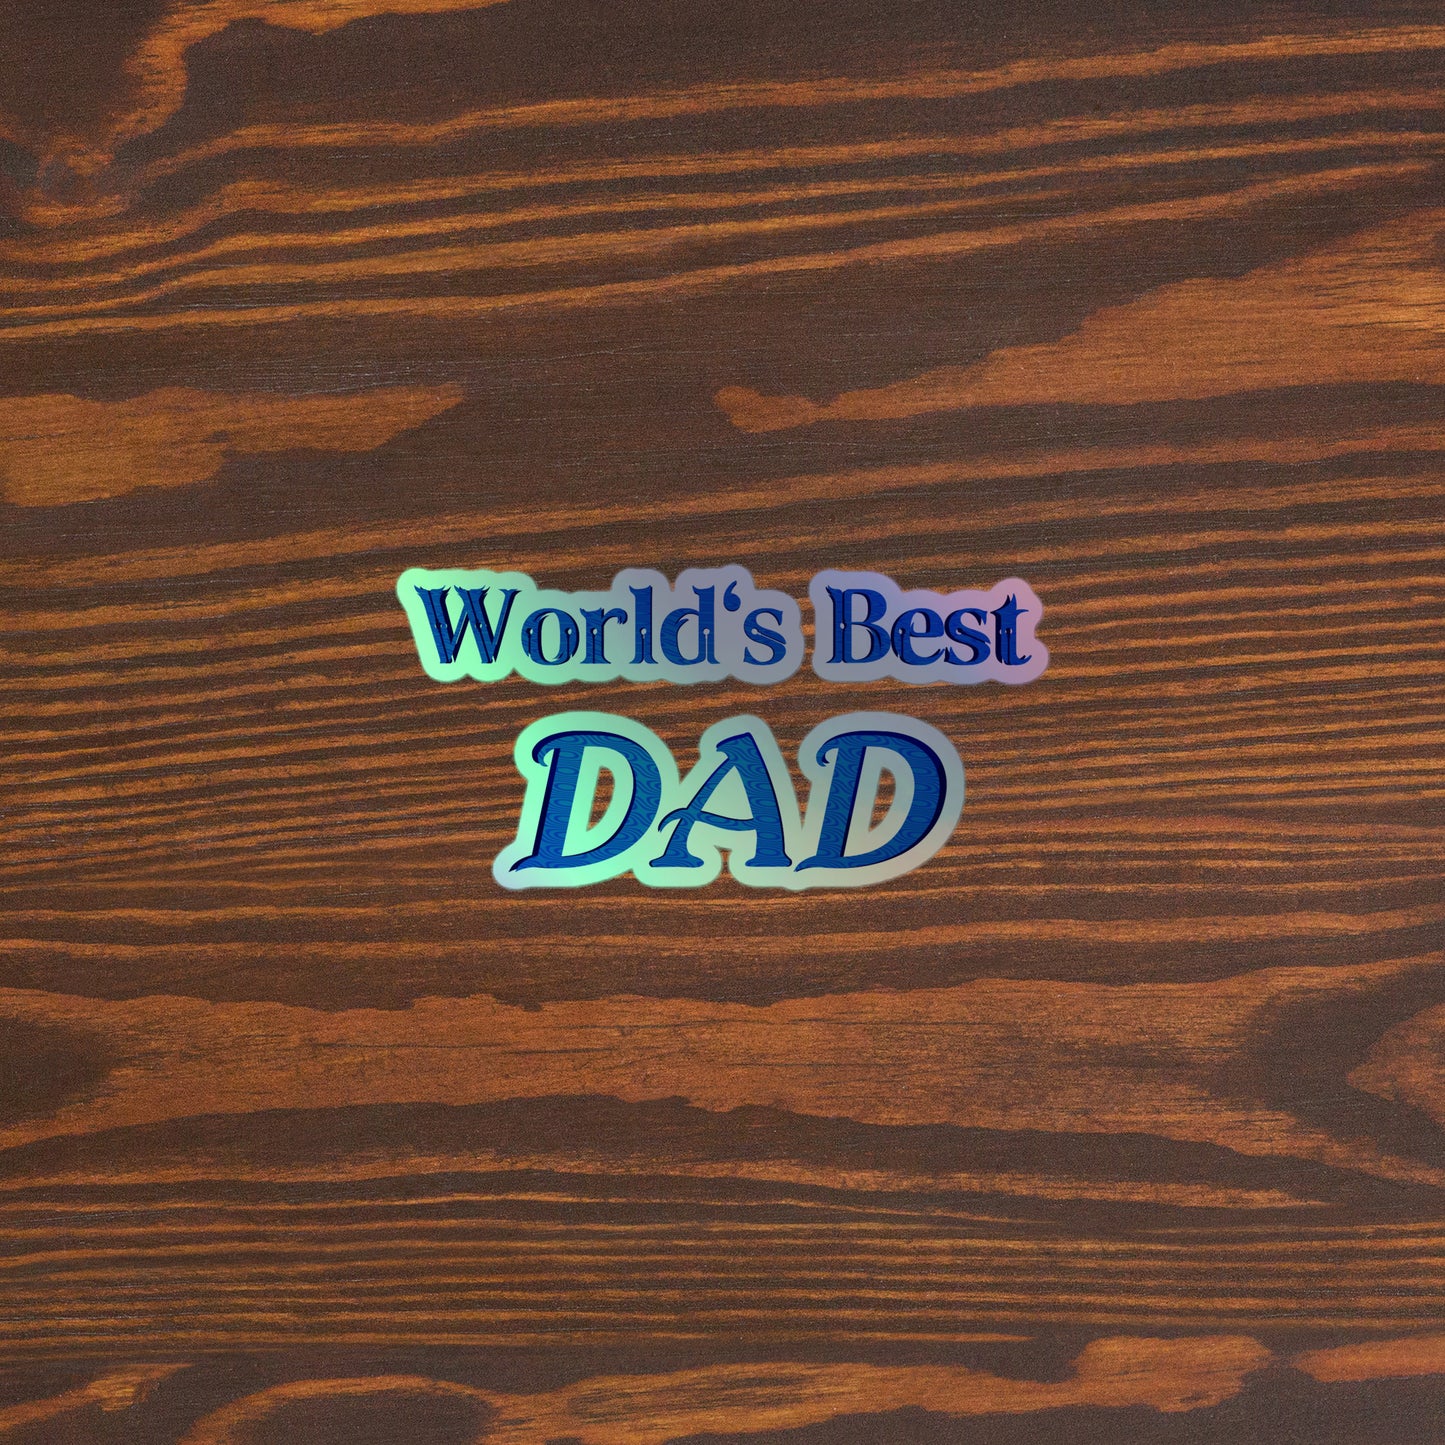 "World's Best Dad" Holographic Stickers